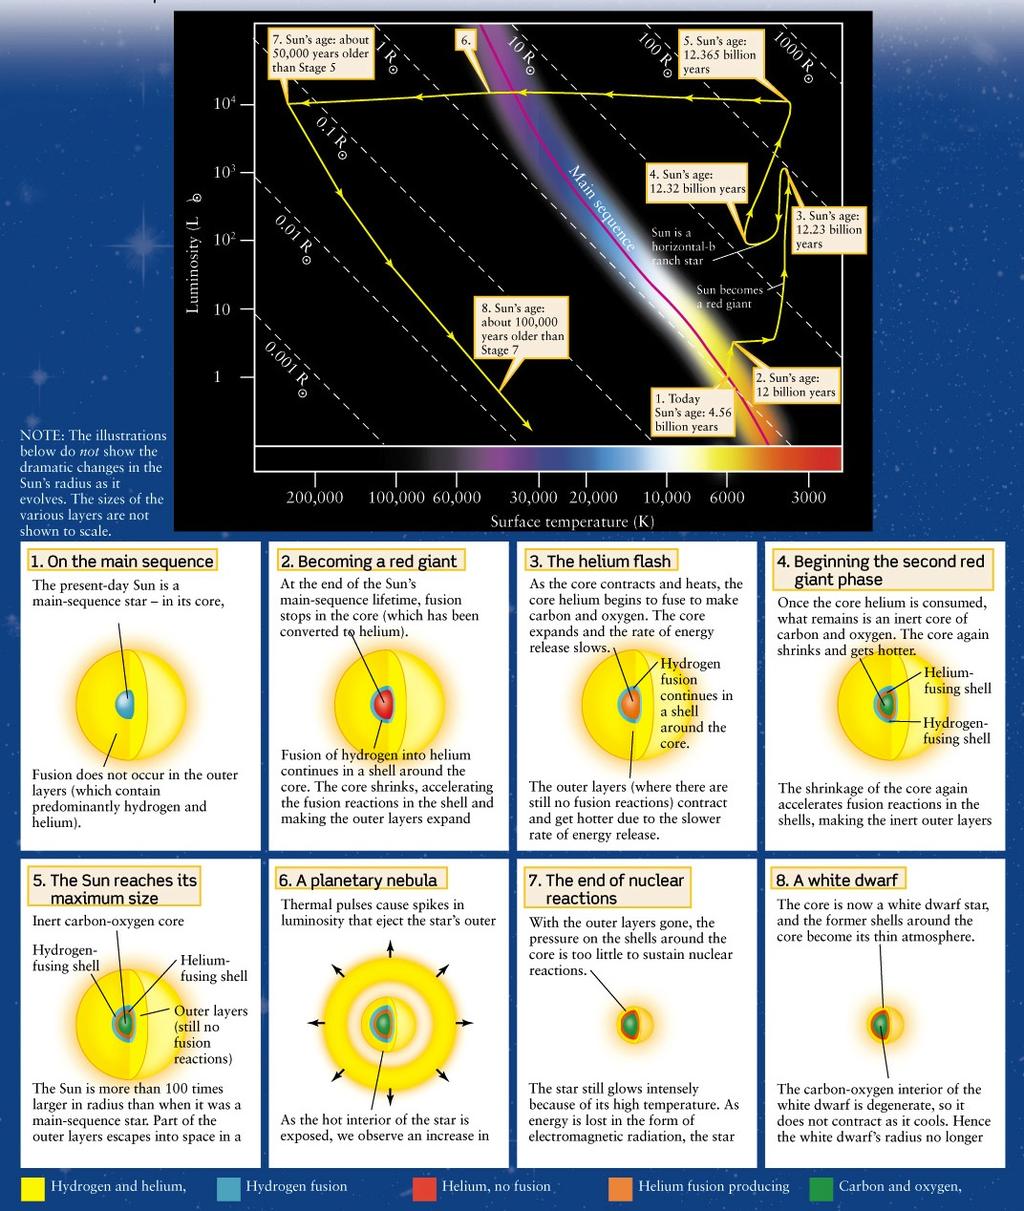 The diagram shows a summary of the life of a solar-type star